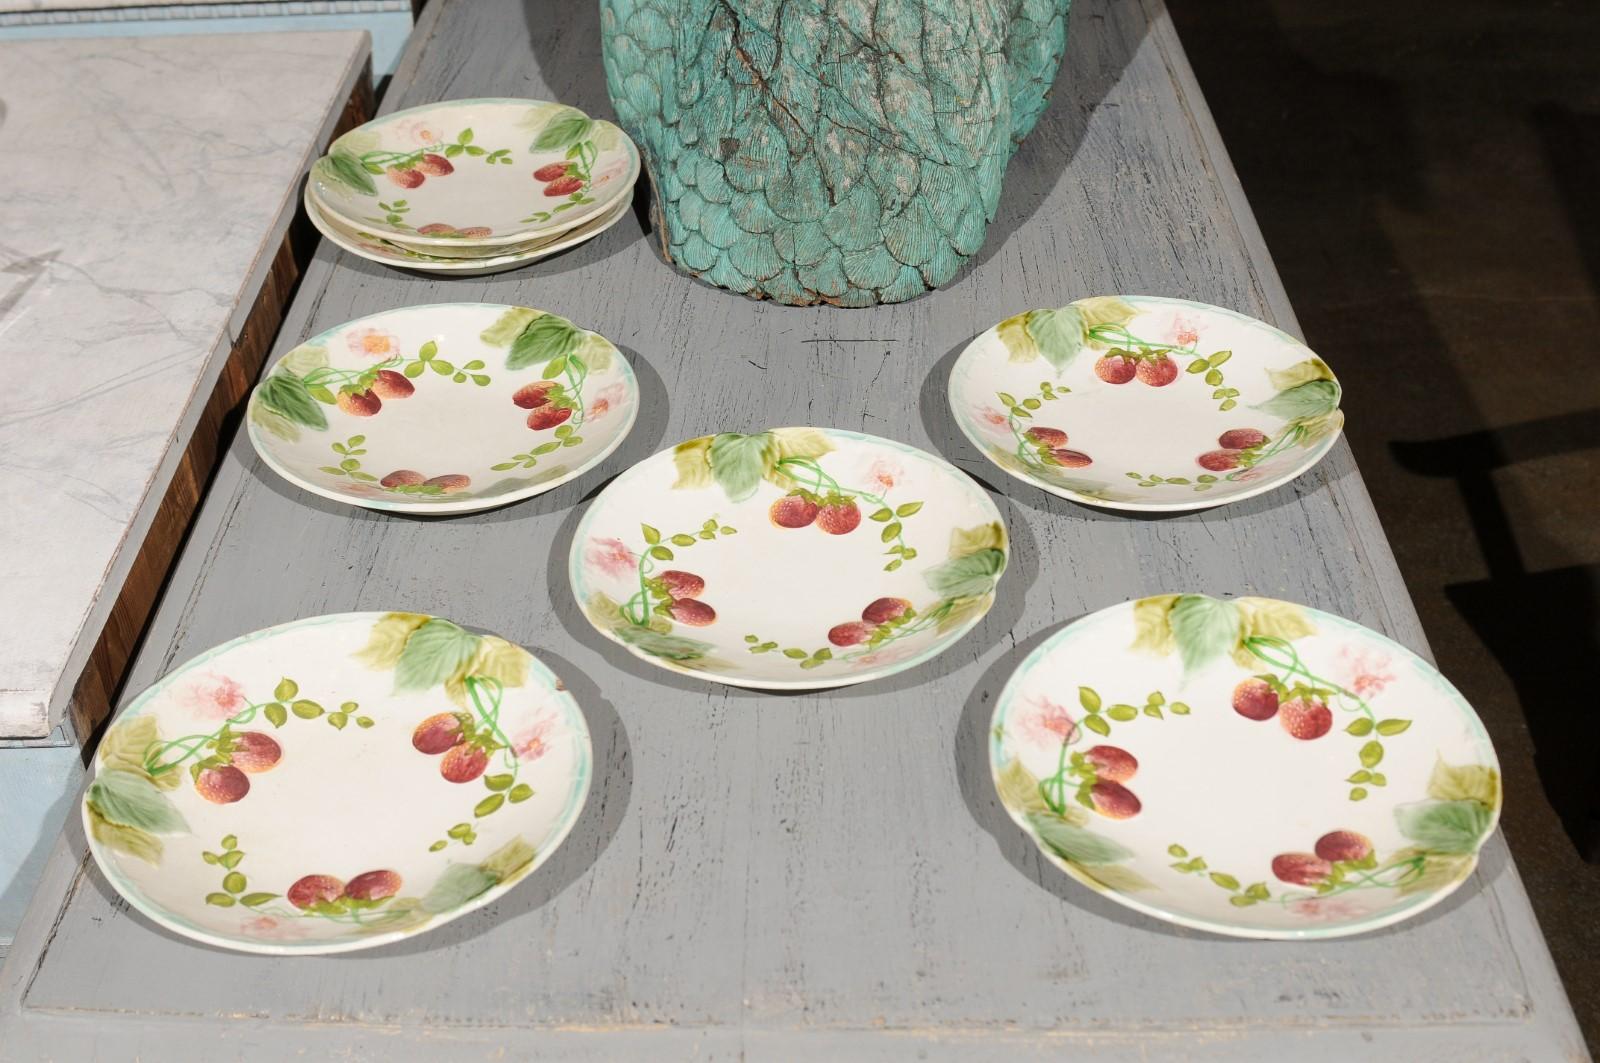 French Choisy-le-Roi 19th Century Majolica Strawberry Plates with Foliage For Sale 6